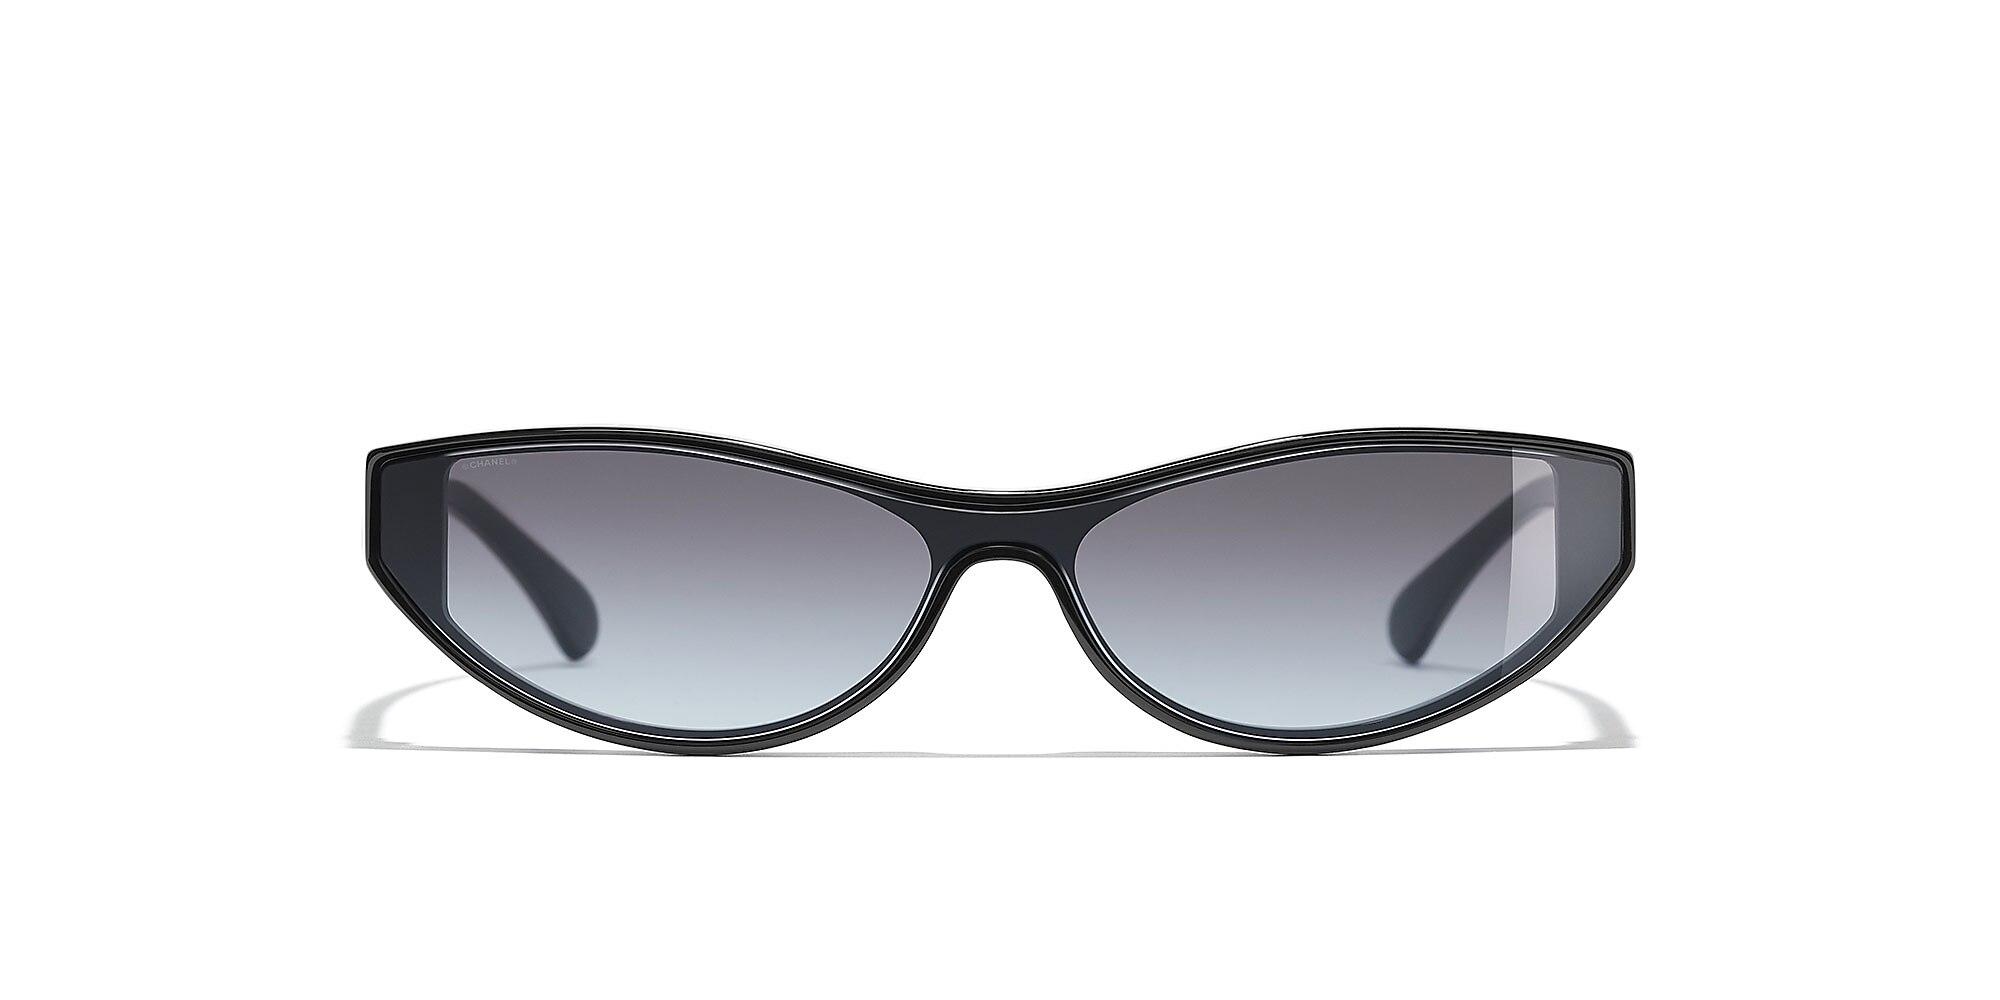 Shop Chanel Sunglasses directly from the source